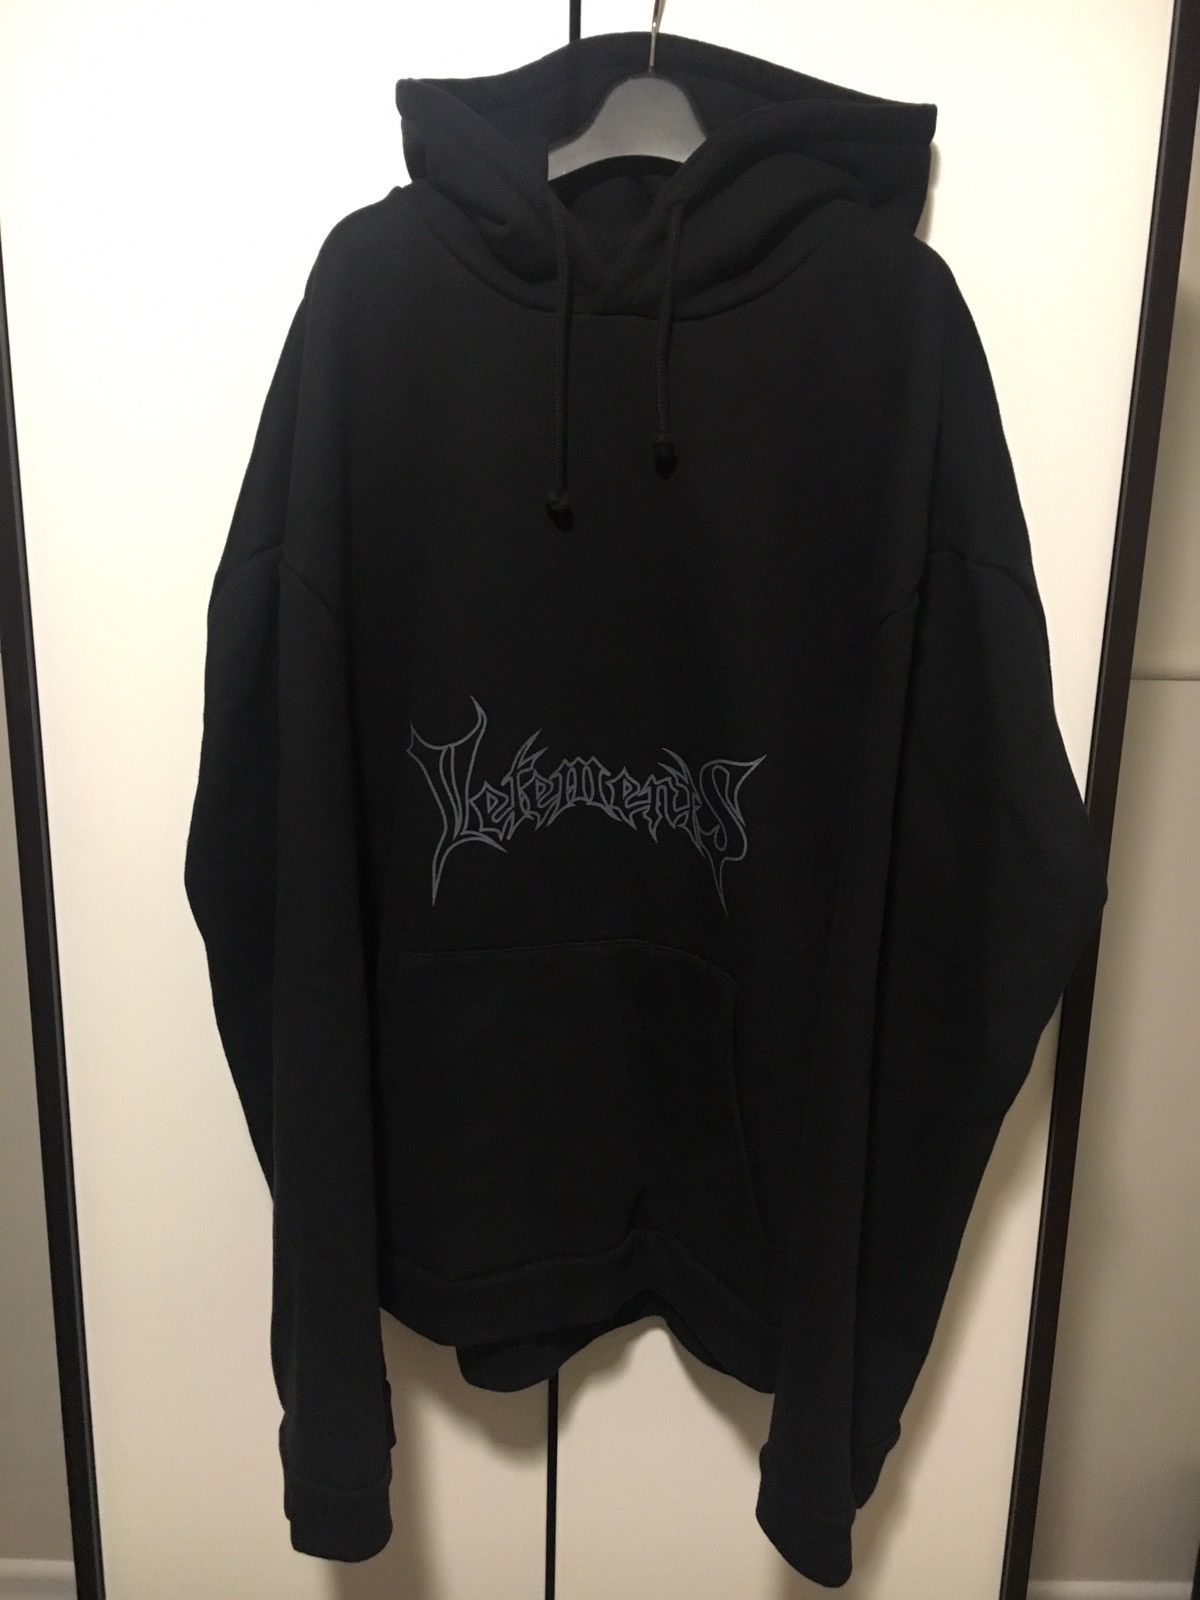 Vetements AW15 OG Metal Logo Hoodie Size US S / EU 44-46 / 1 - 1 Preview